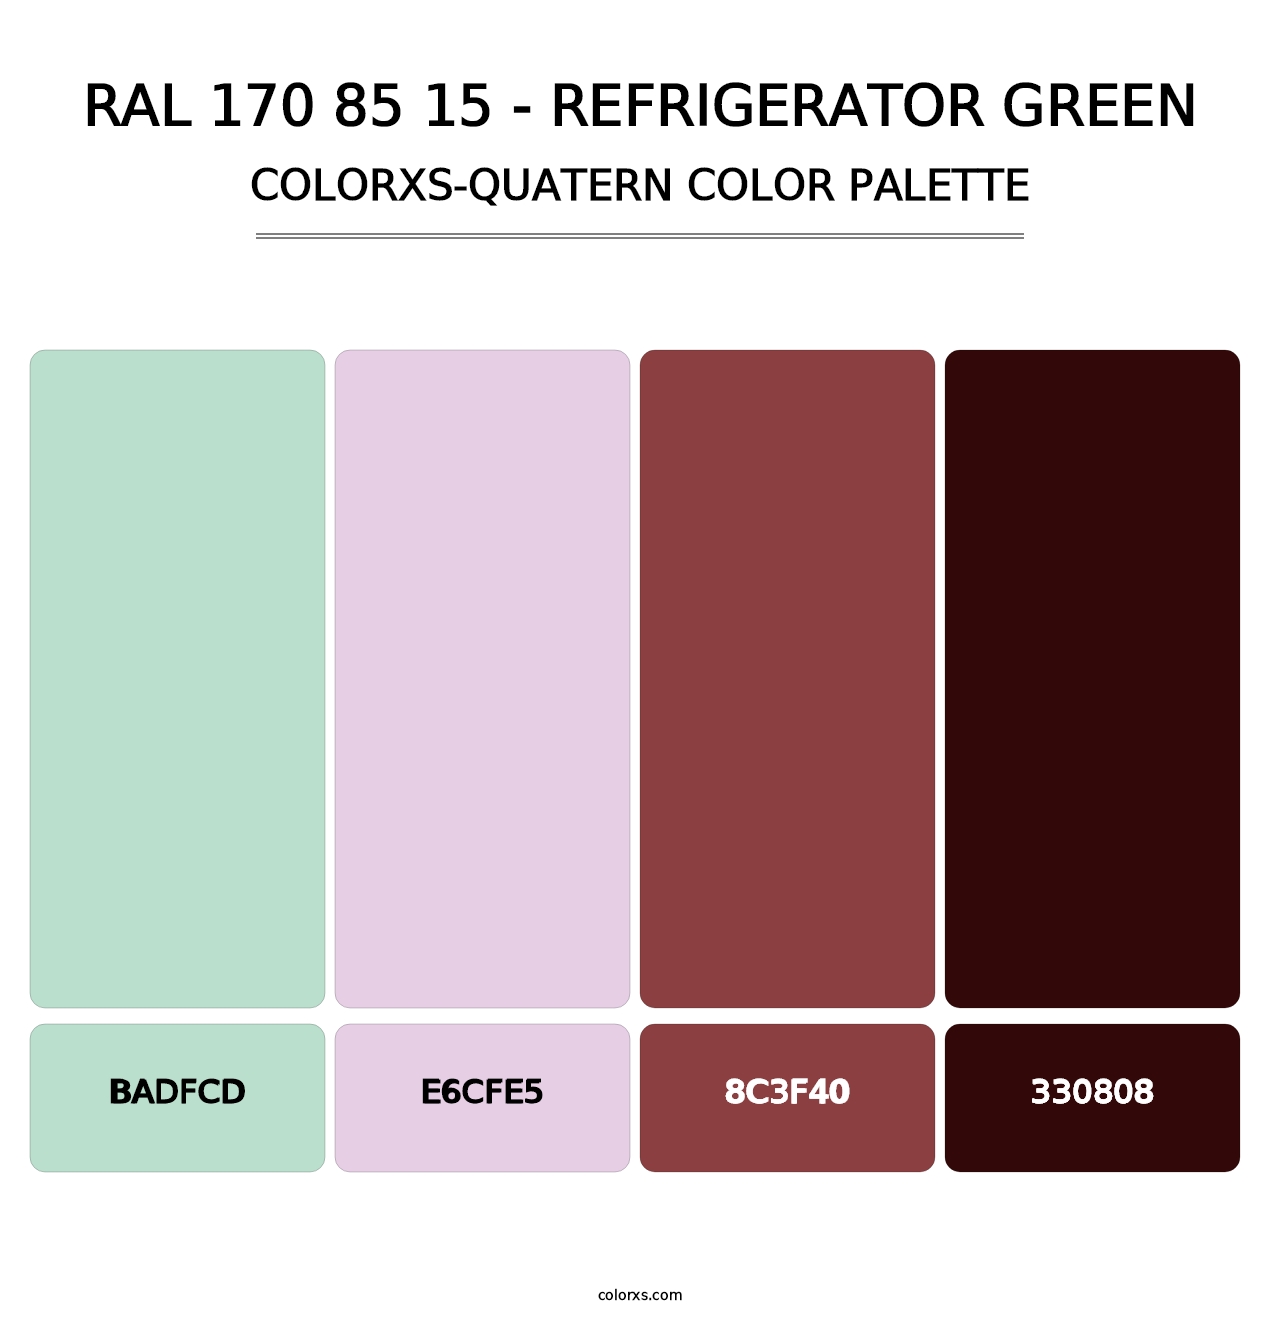 RAL 170 85 15 - Refrigerator Green - Colorxs Quatern Palette